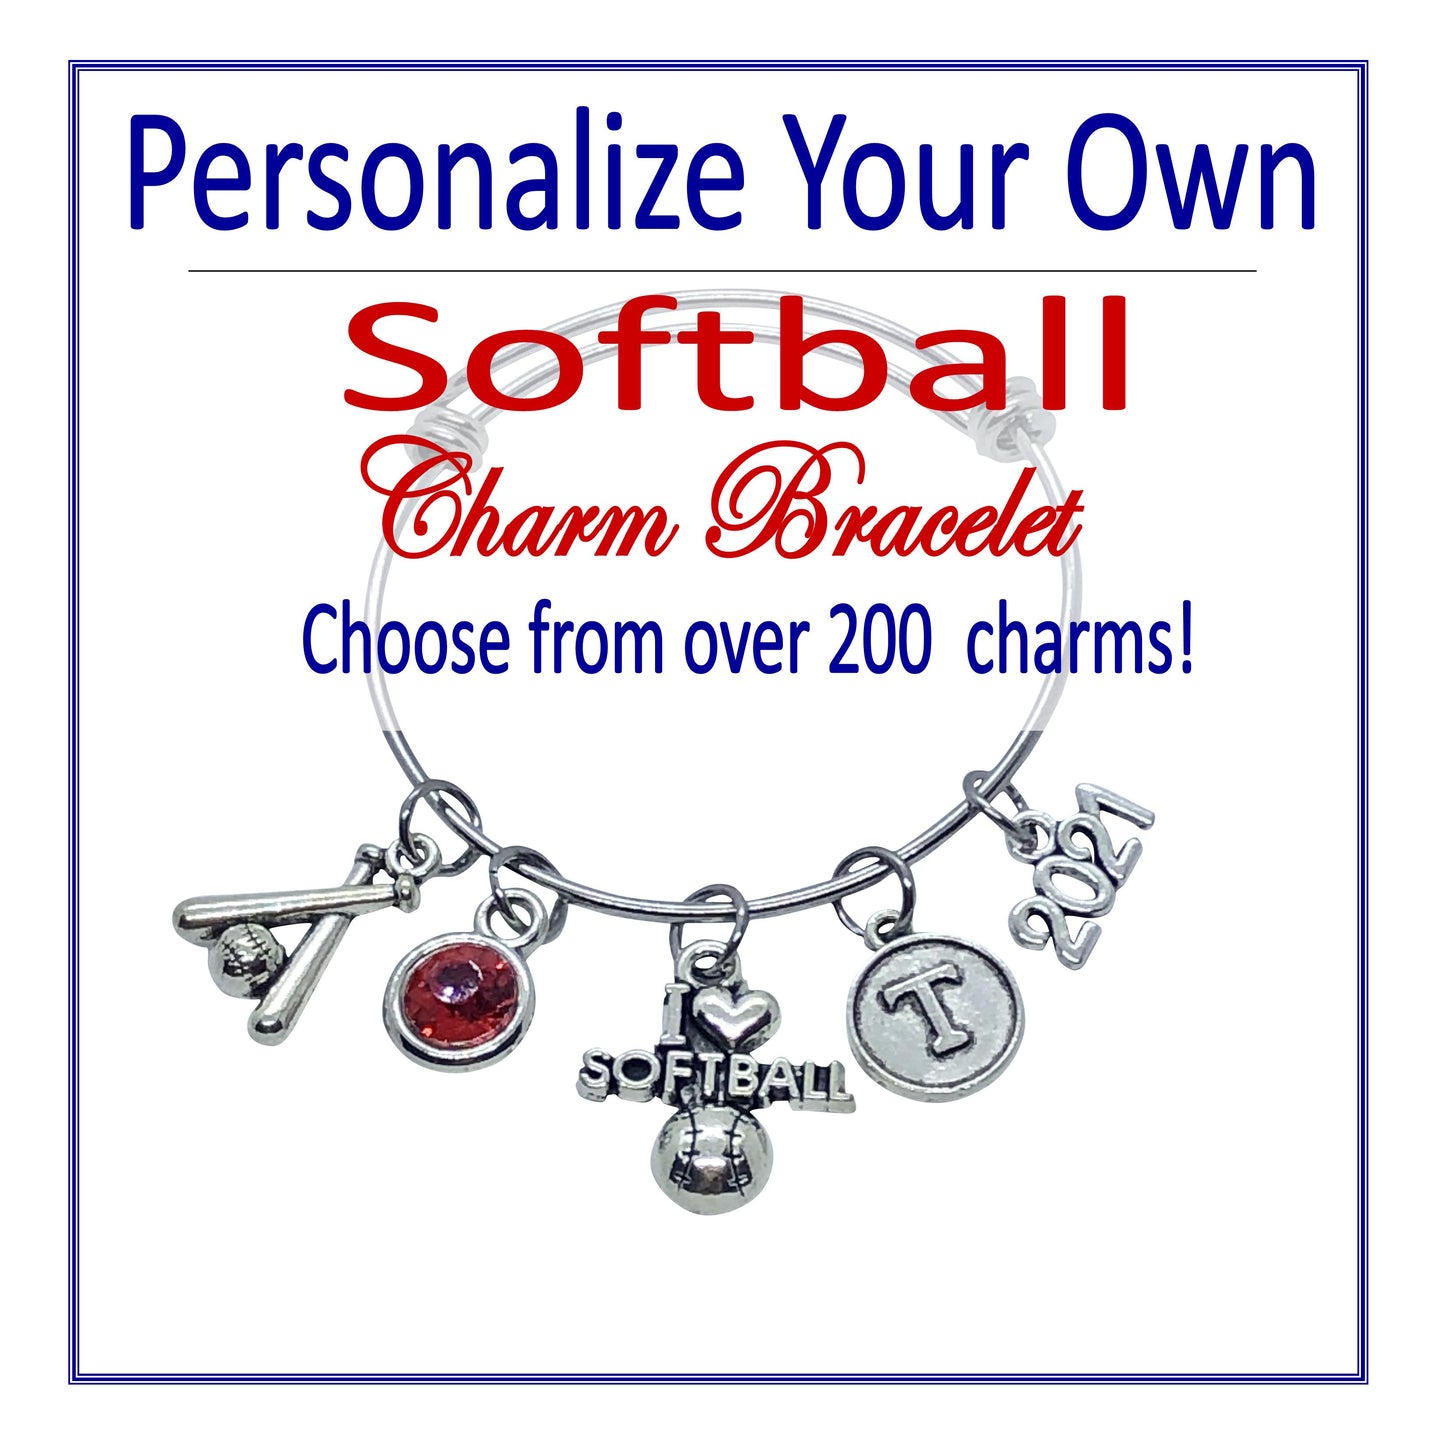 Load image into Gallery viewer, Create Your Own Softball Charm Bracelet - Cheer and Dance On Demand
